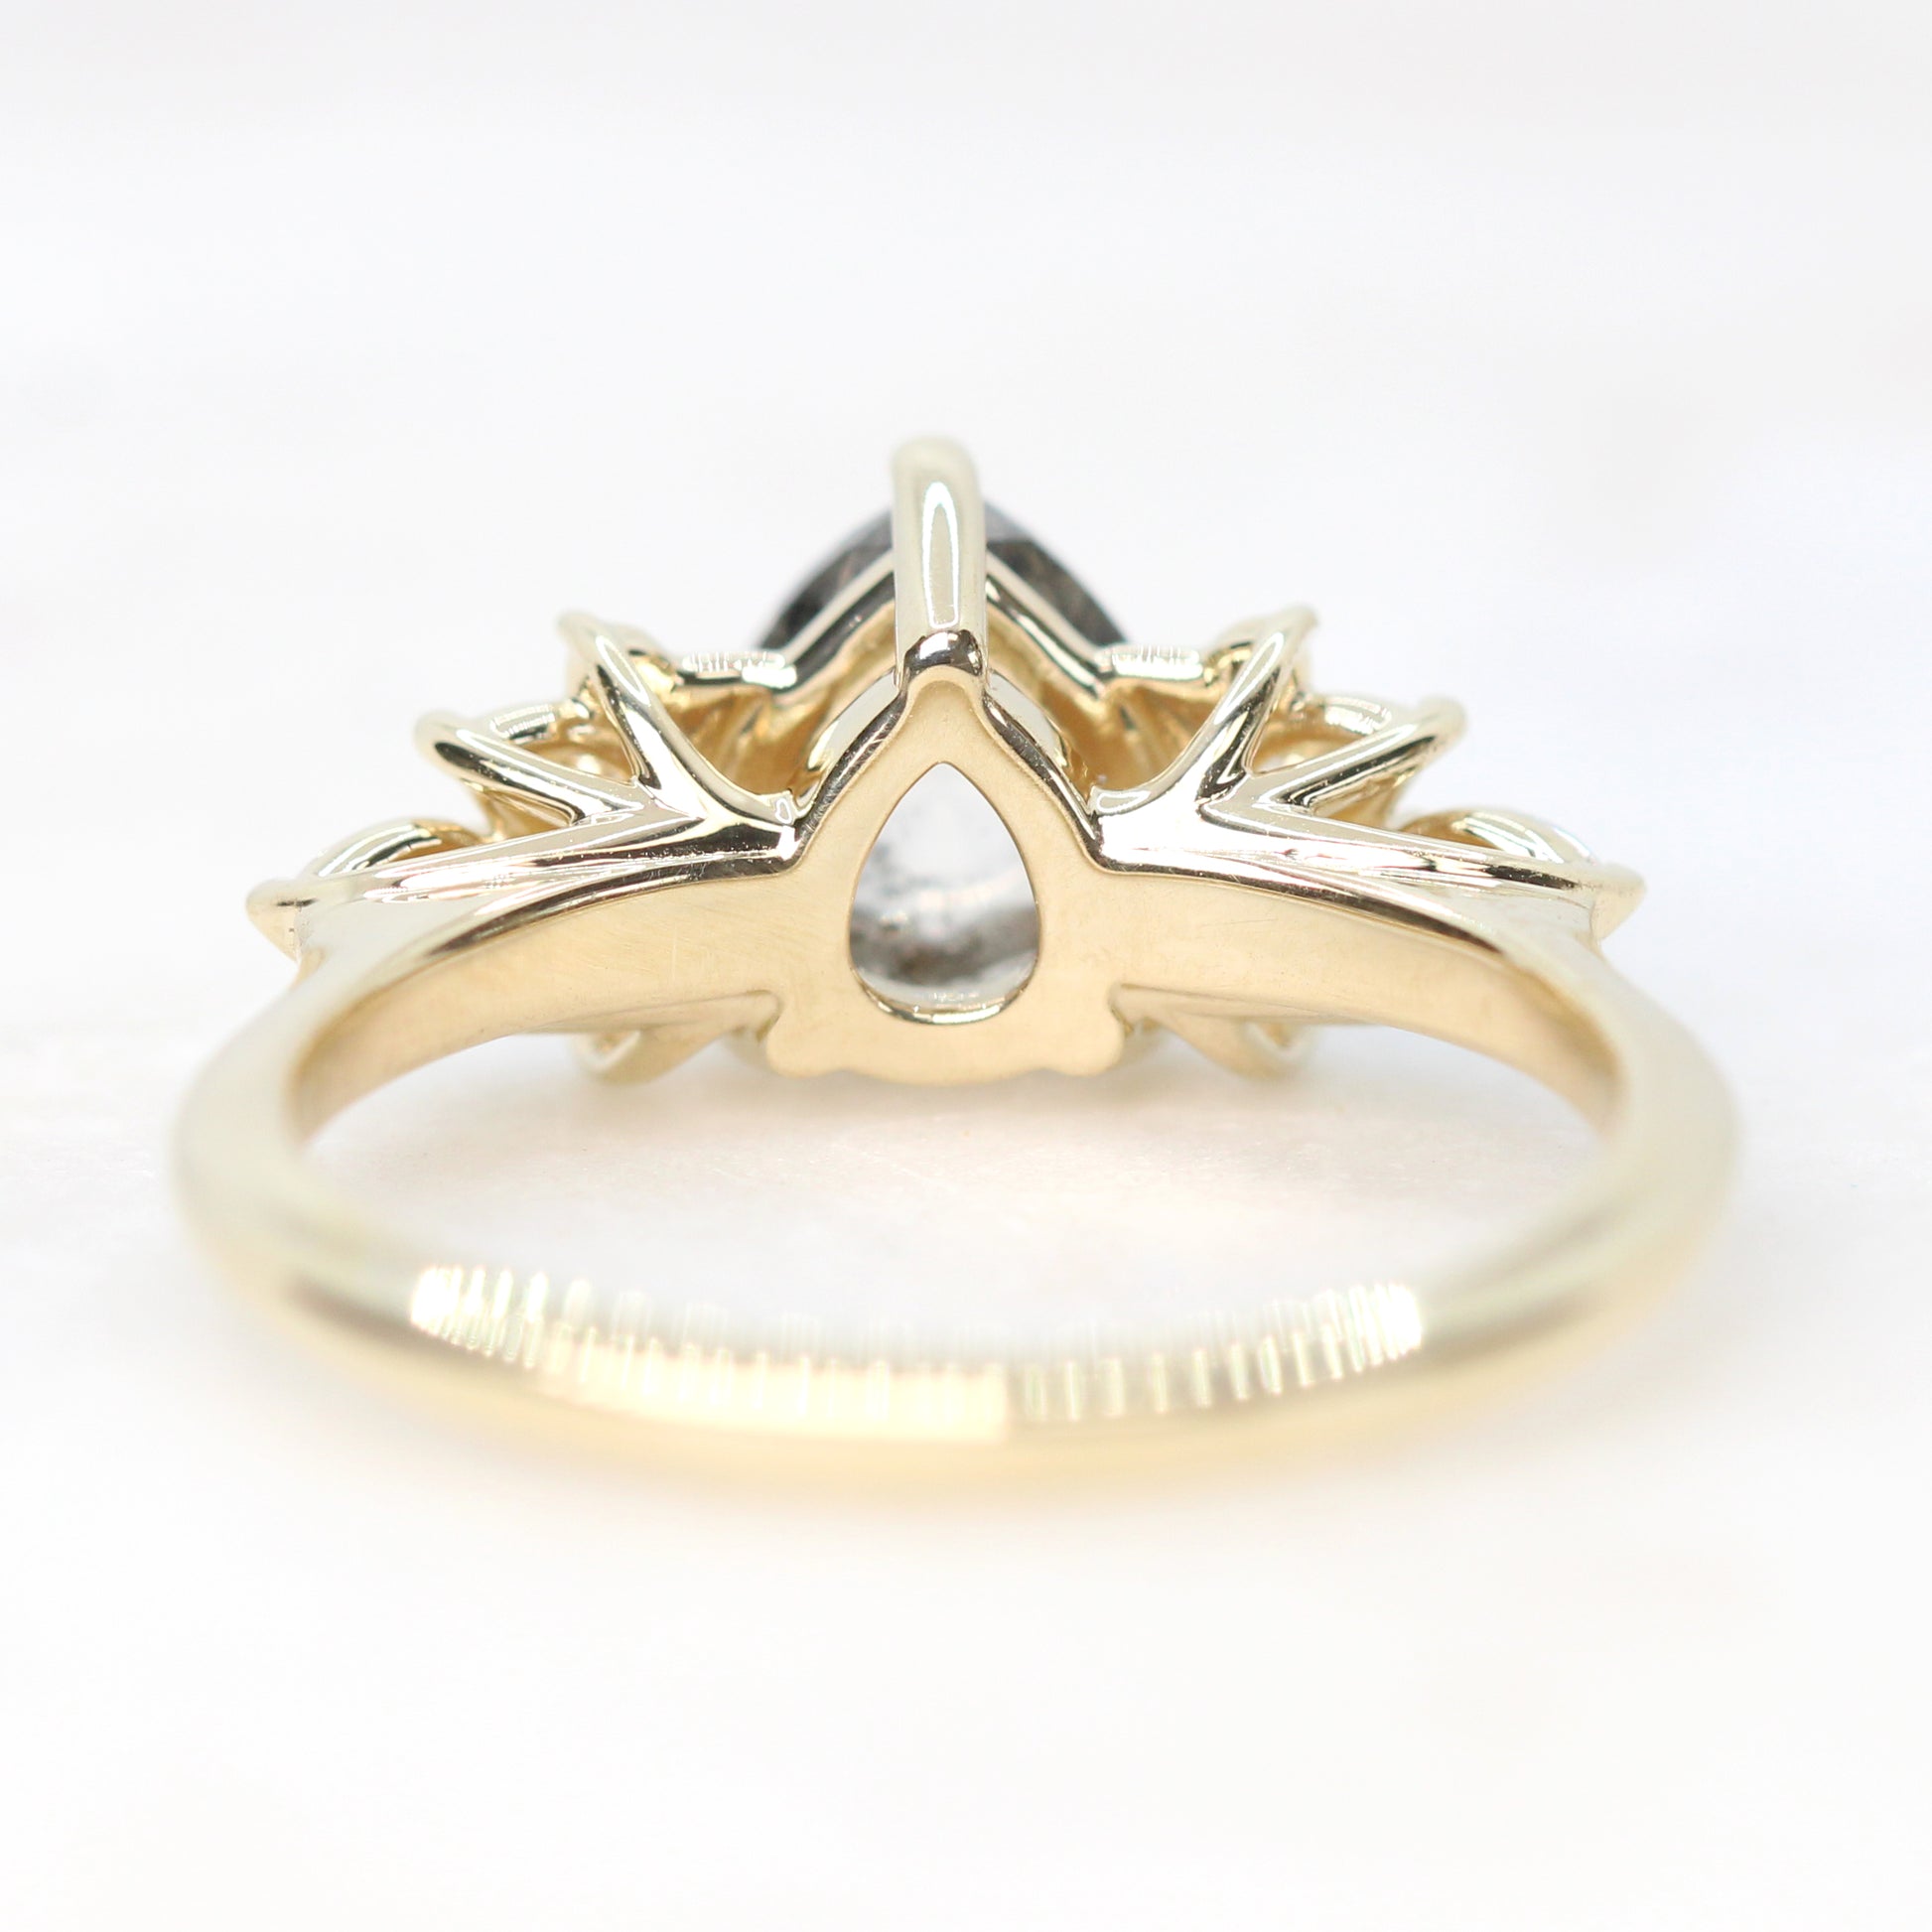 Odette Ring with a 1.50 Carat Pear Clear Gray Salt and Pepper Diamond and White Accent Diamonds in 14k Yellow Gold - Ready to Size and Ship - Midwinter Co. Alternative Bridal Rings and Modern Fine Jewelry